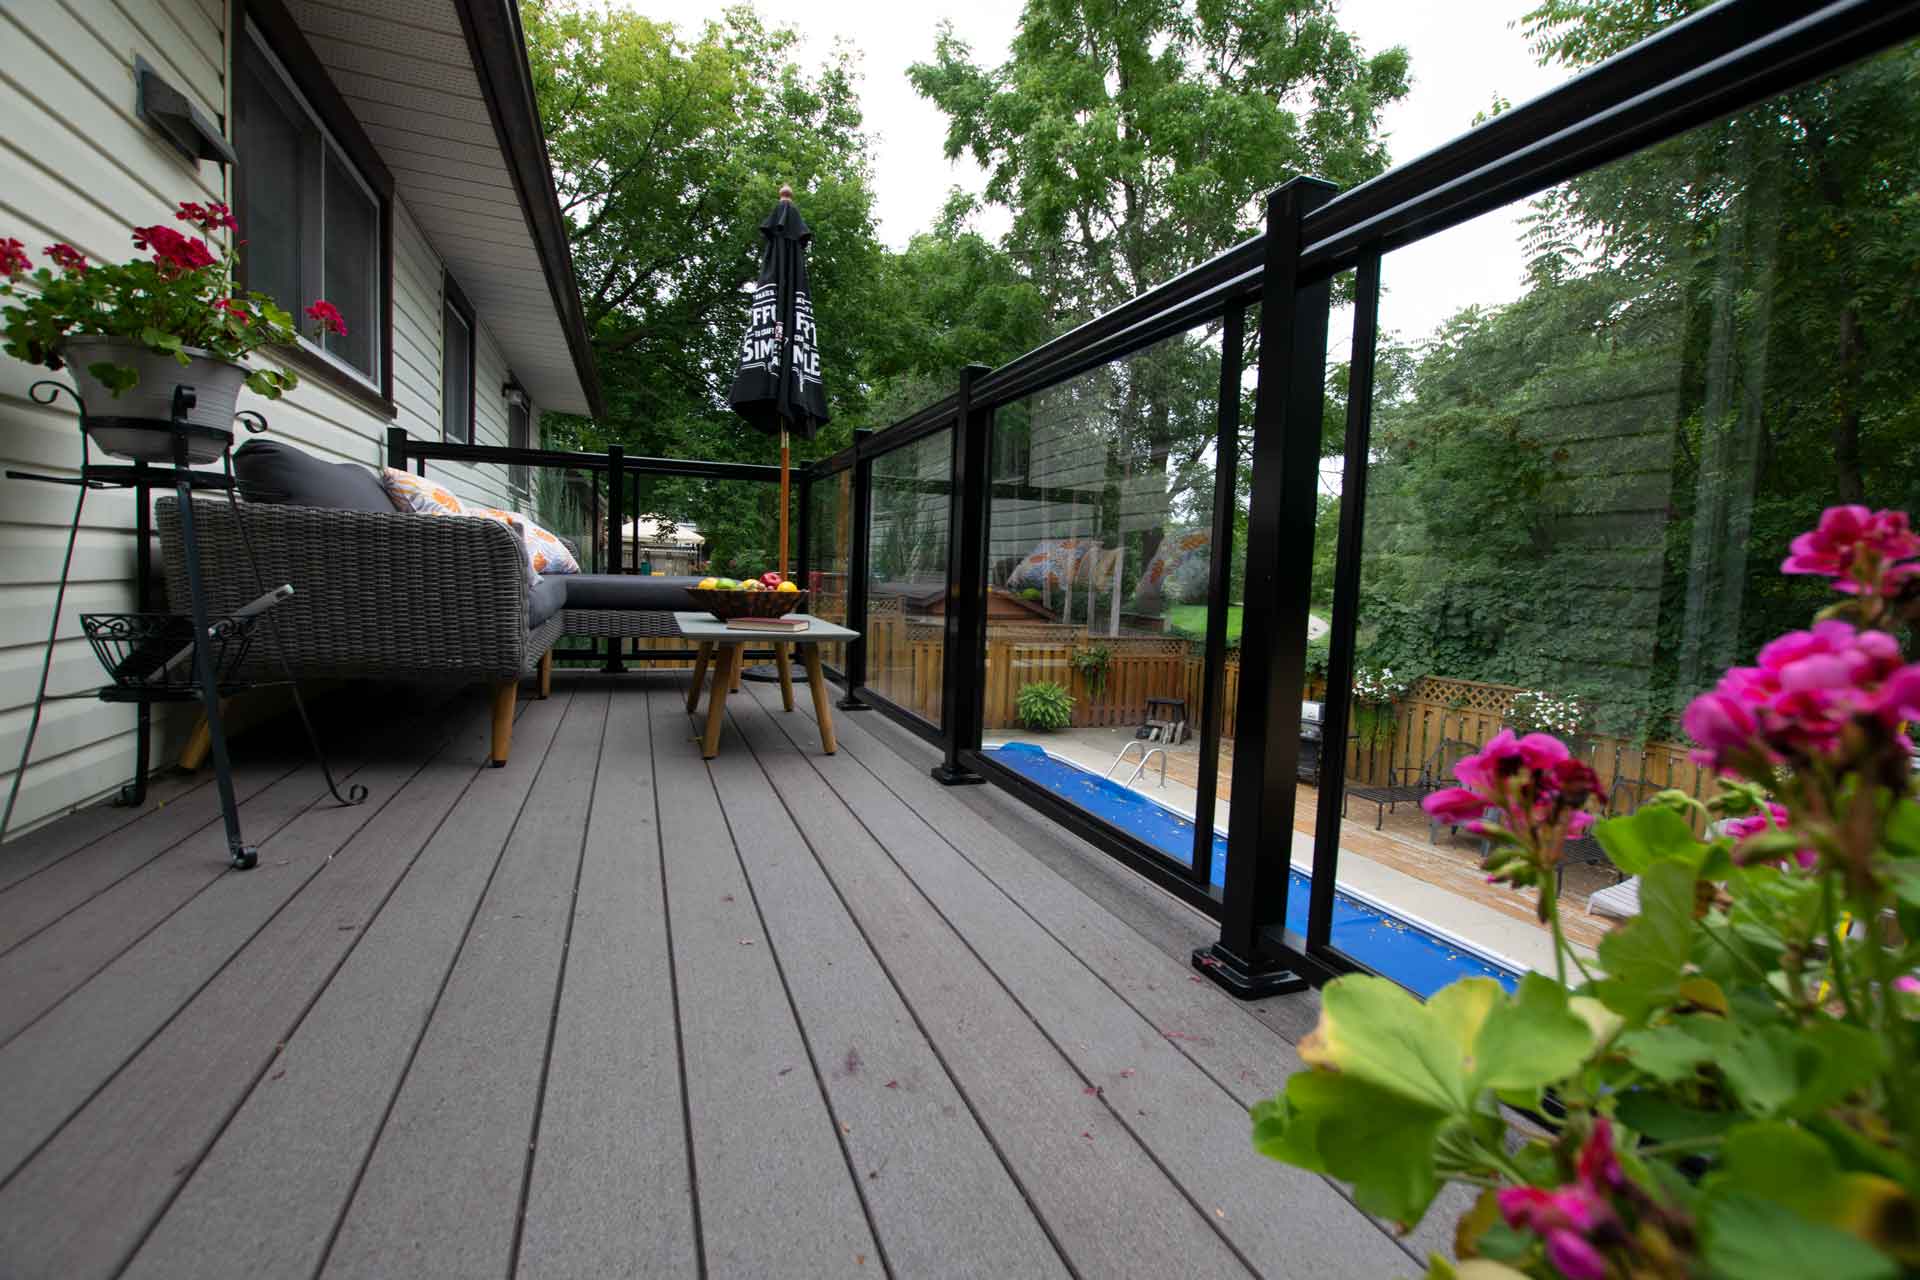 deck with rails